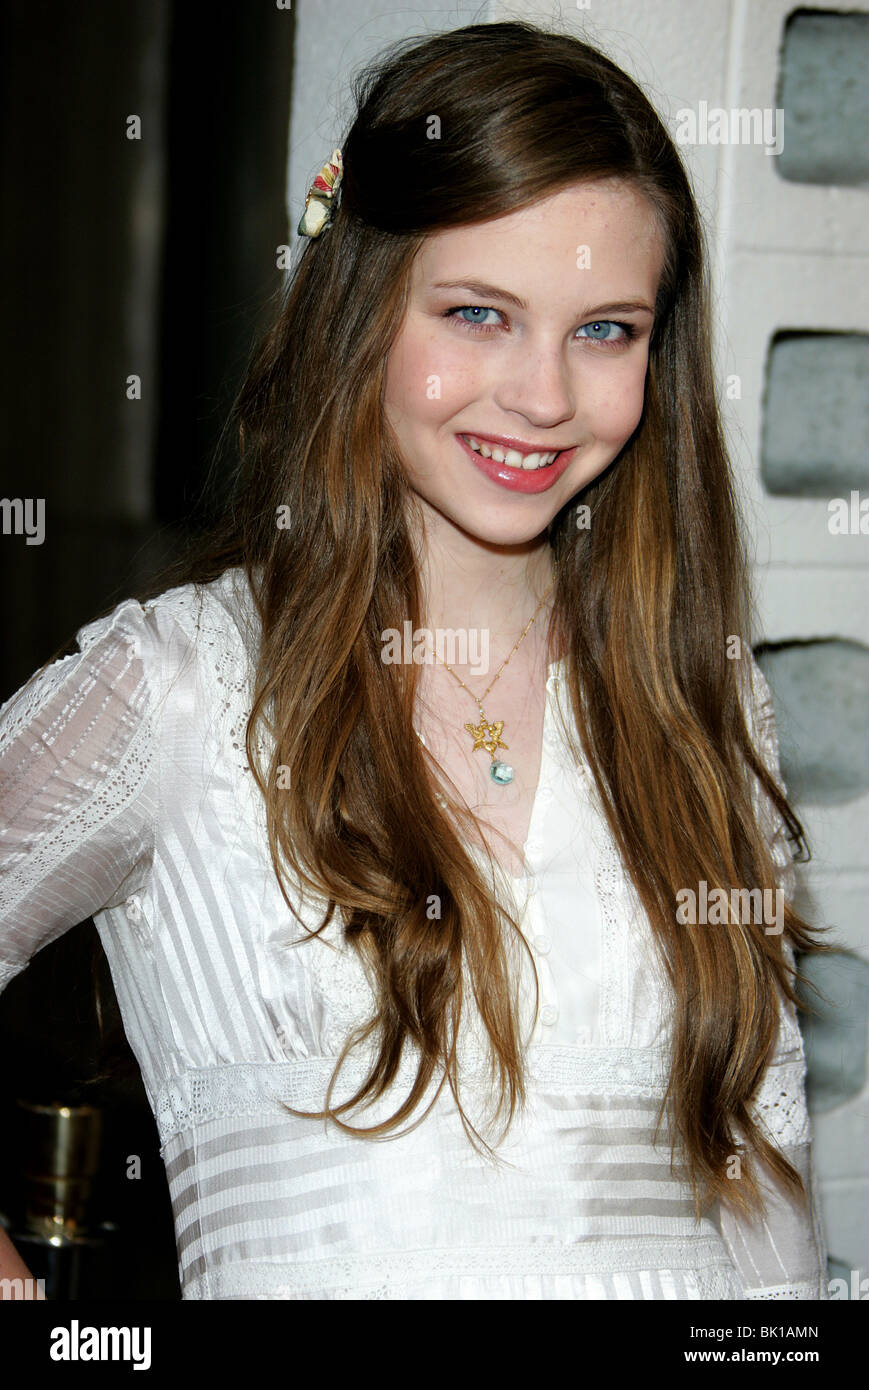 DAVEIGH CHASE DEADWOOD SEASON 2 PREMIERE CINERAMA DOME HOLLYWOOD LOS ANGELES USA 06 June 2006 Stock Photo